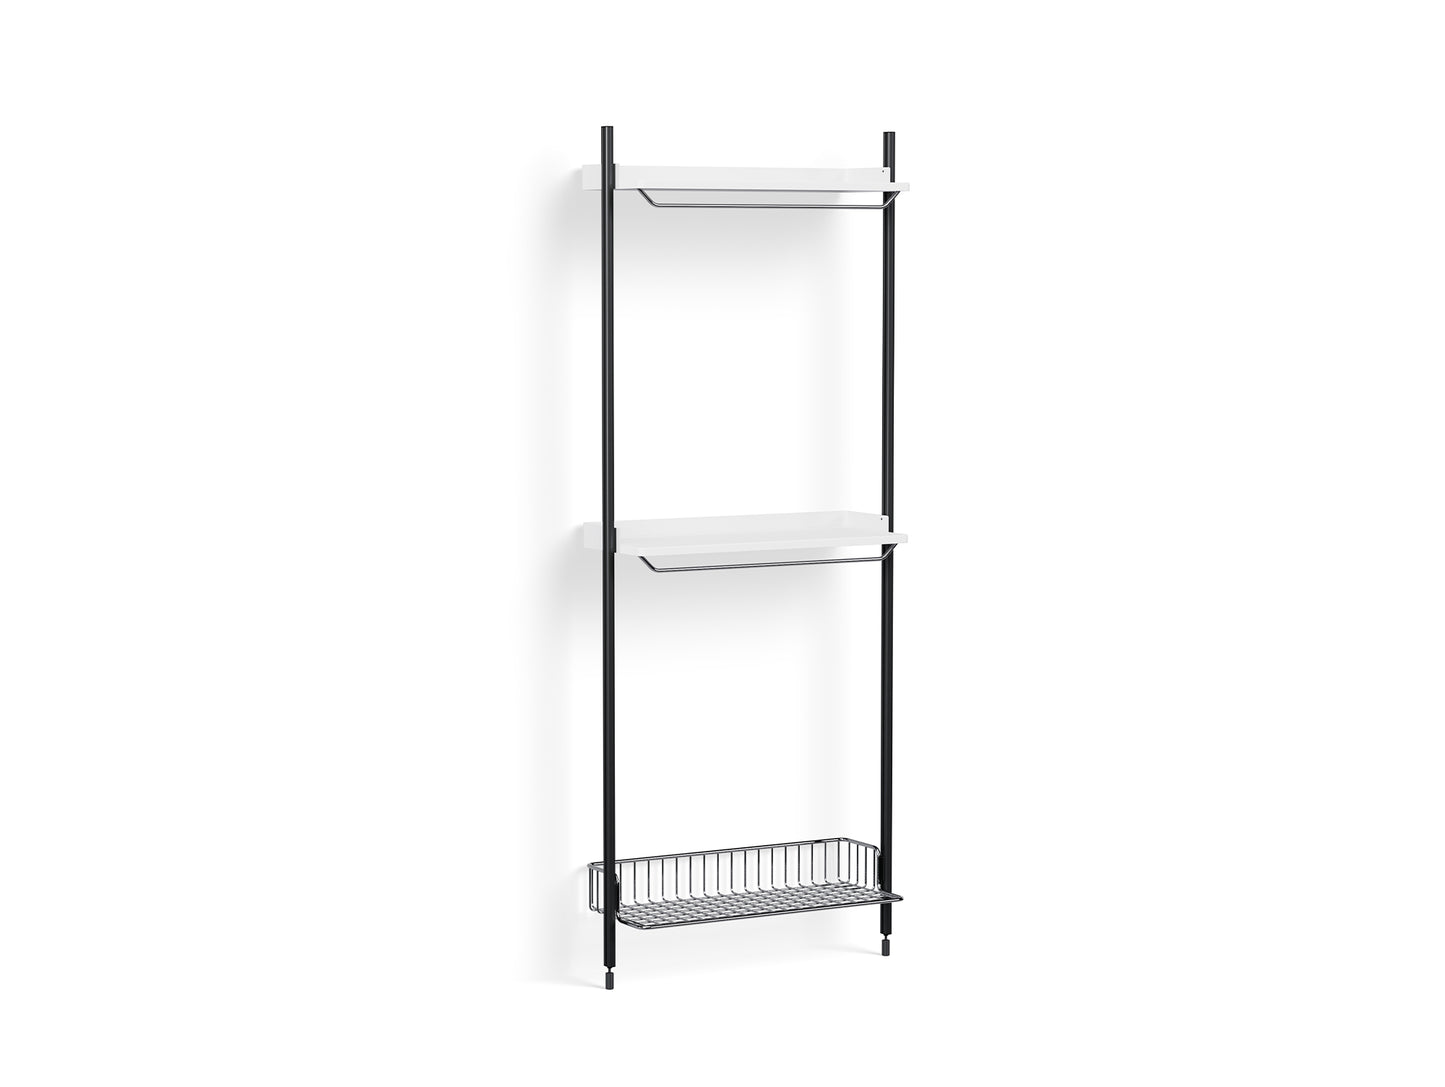 Pier System 1031 by HAY - Black Anodised Aluminium Uprights / PS White with Chromed Wire Shelf